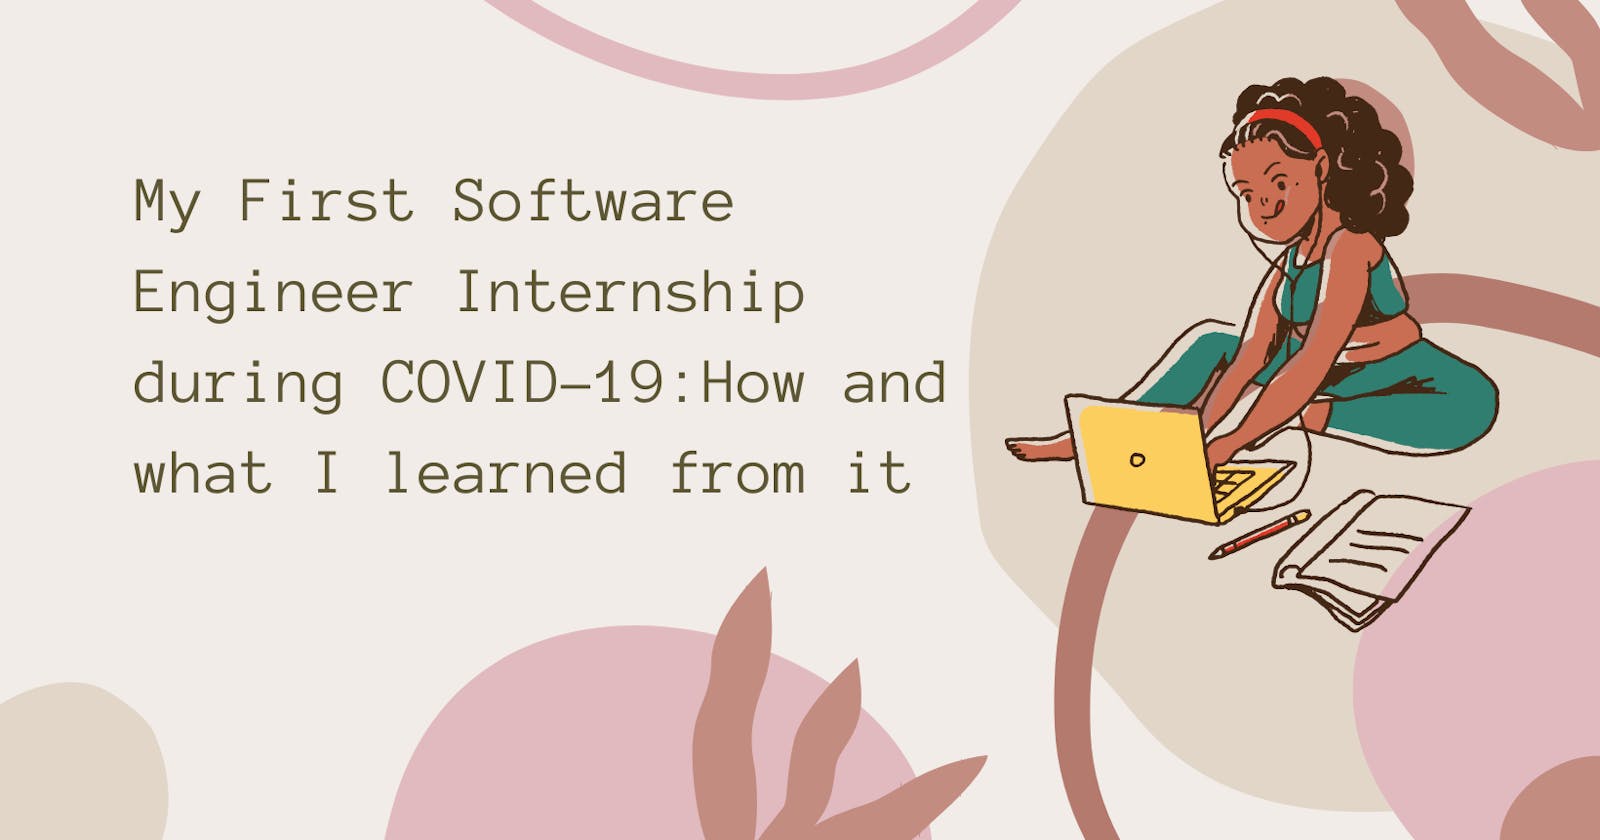 My First Software Engineer Internship during COVID-19: How and what I learned from it